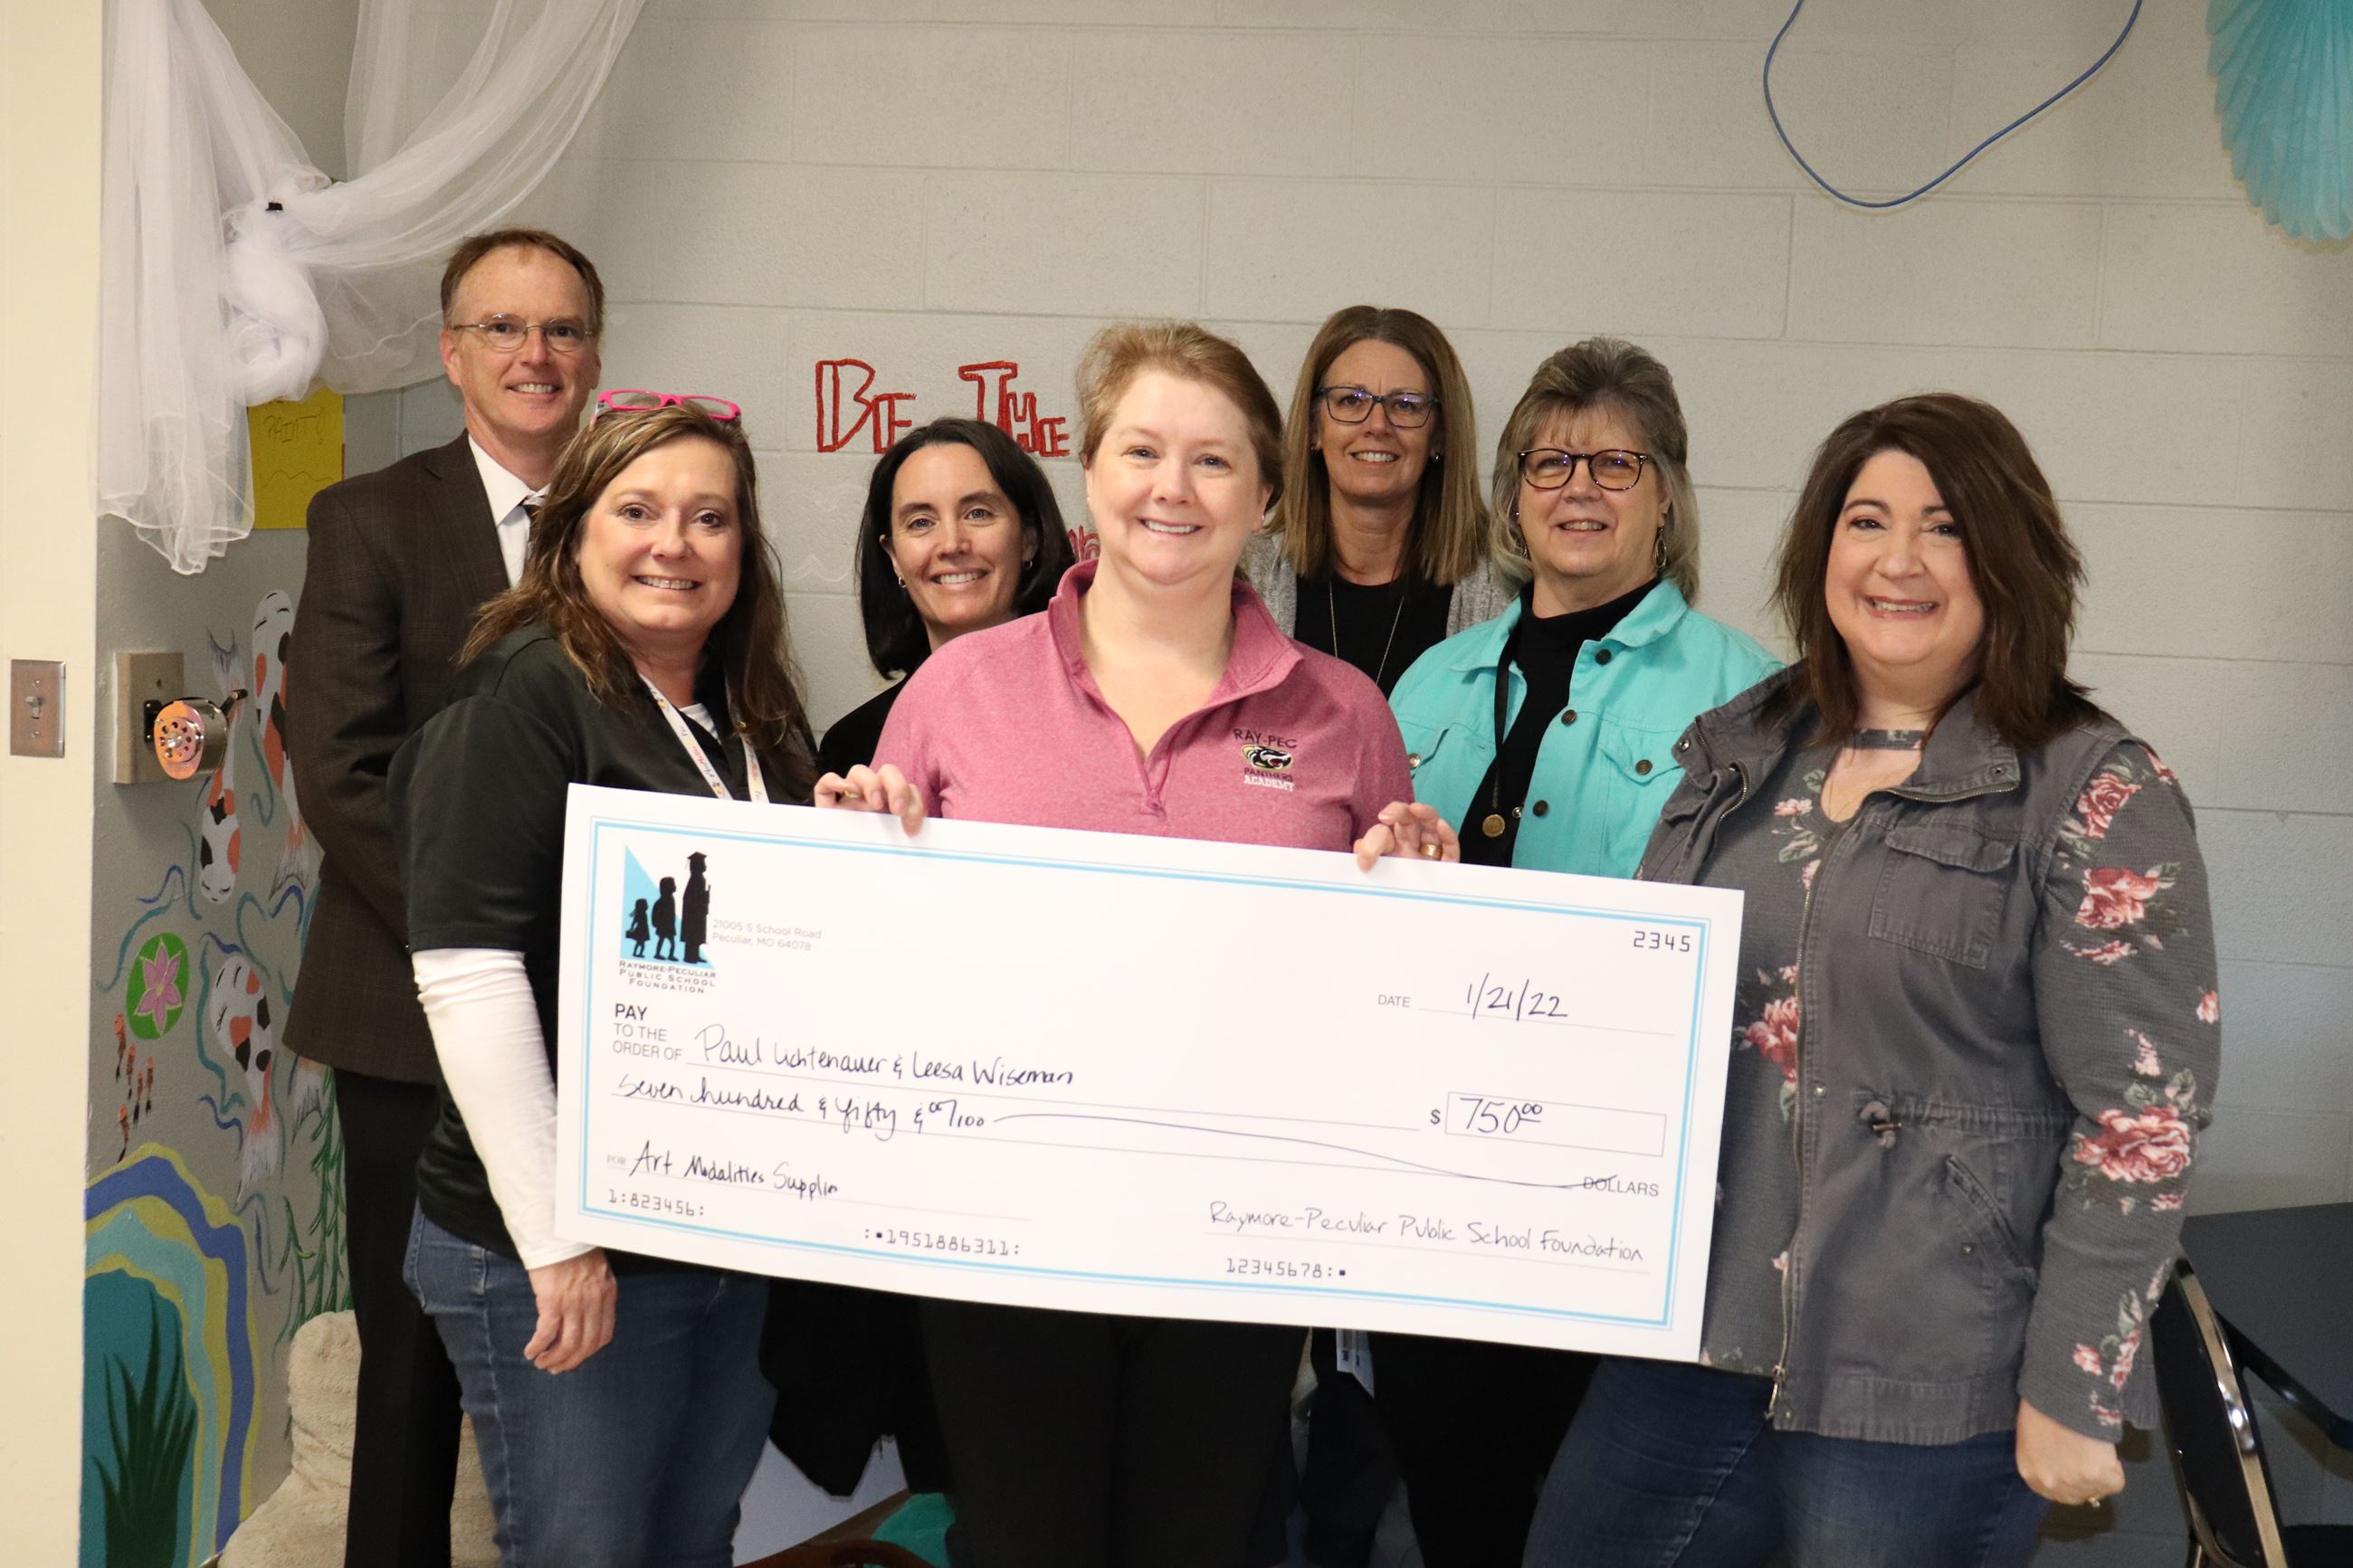 Grant to purchase art supplies